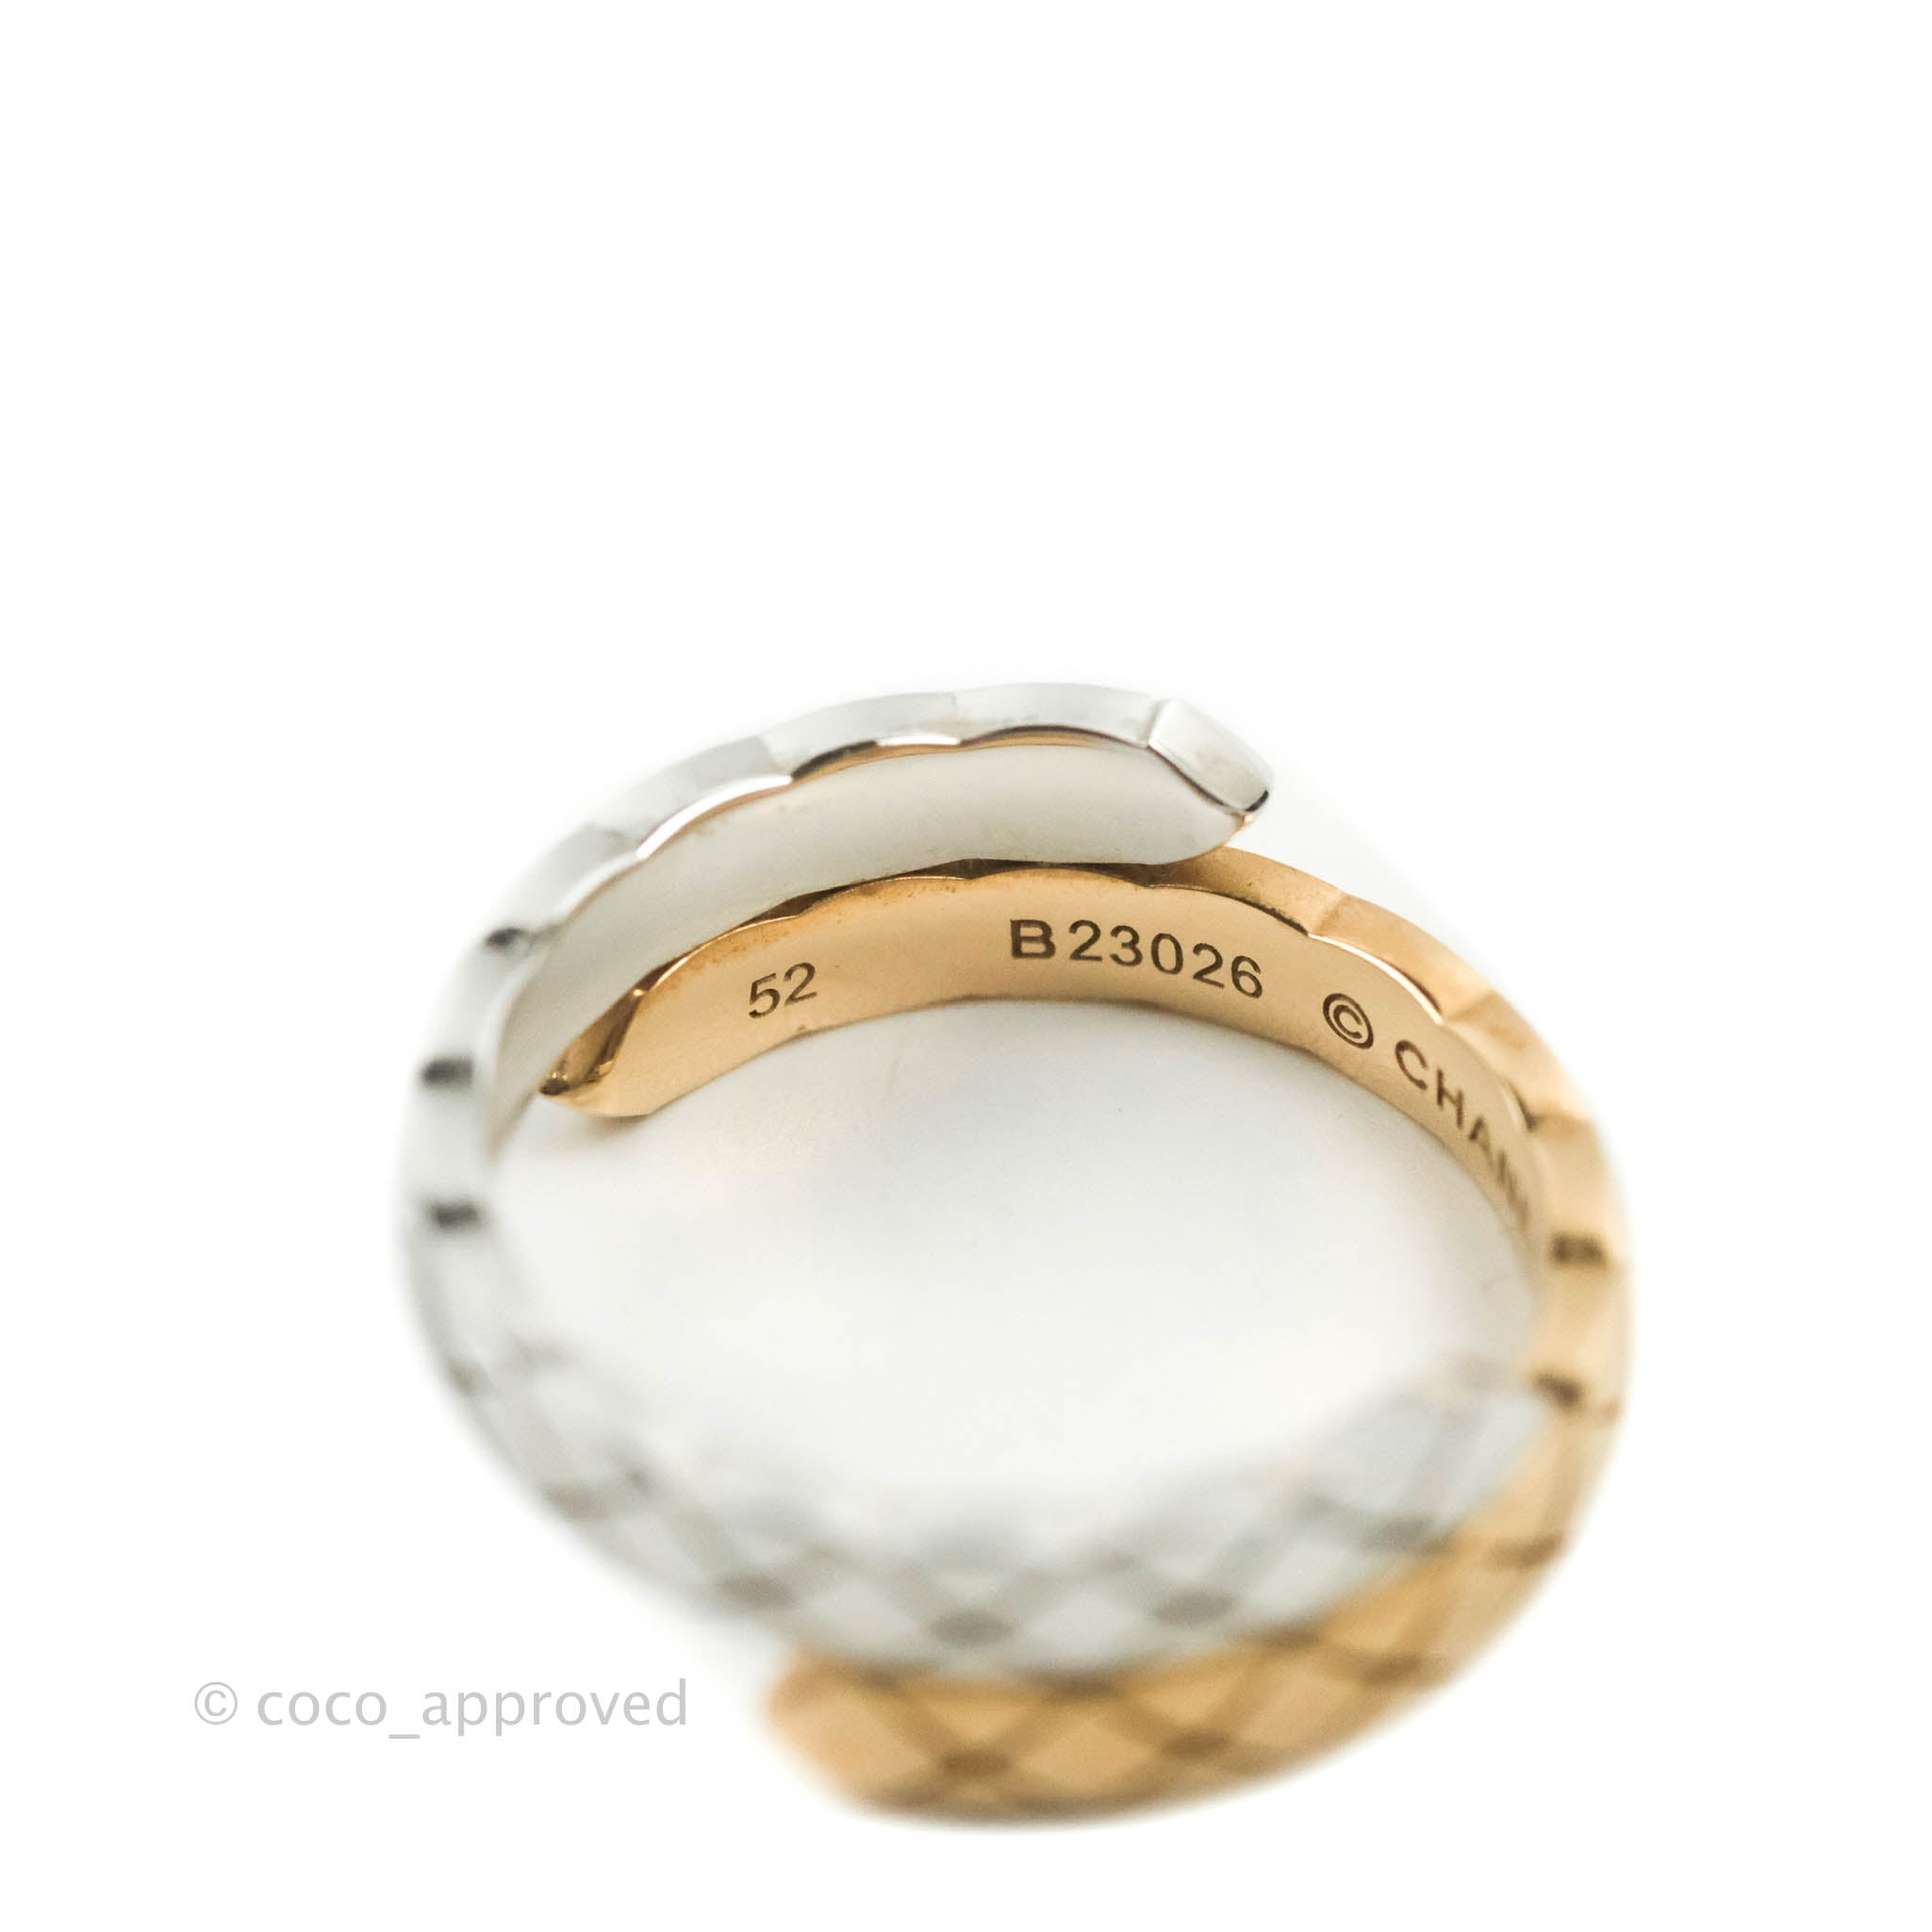 Chanel Coco Crush Toi et Moi Small Ring, 51